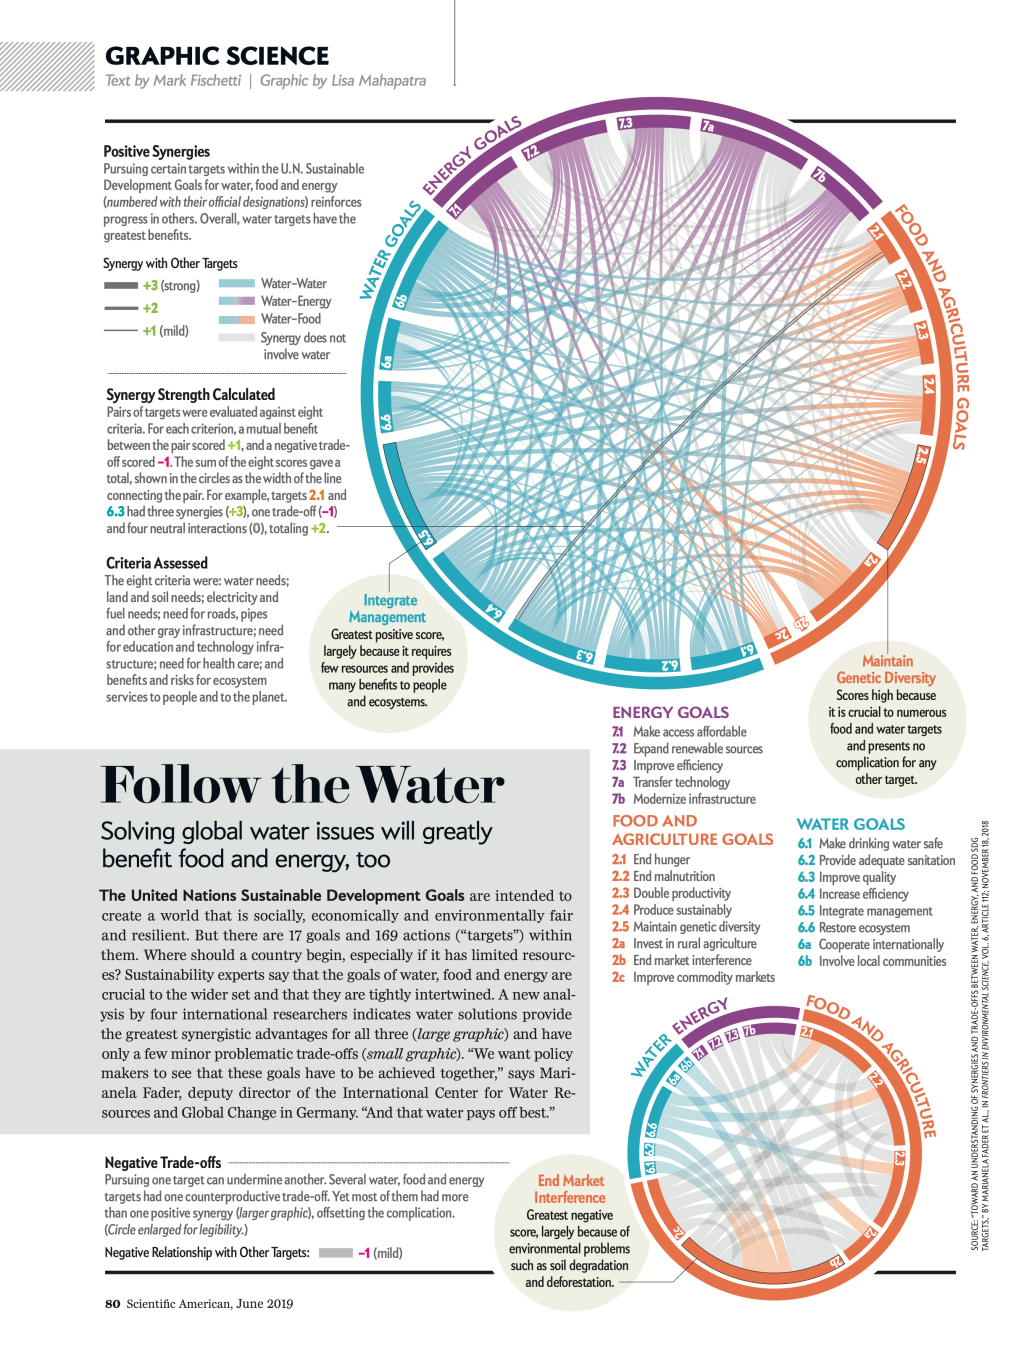 Follow The Water: Relationships between Non-Ordinal Nodes for Scientific American